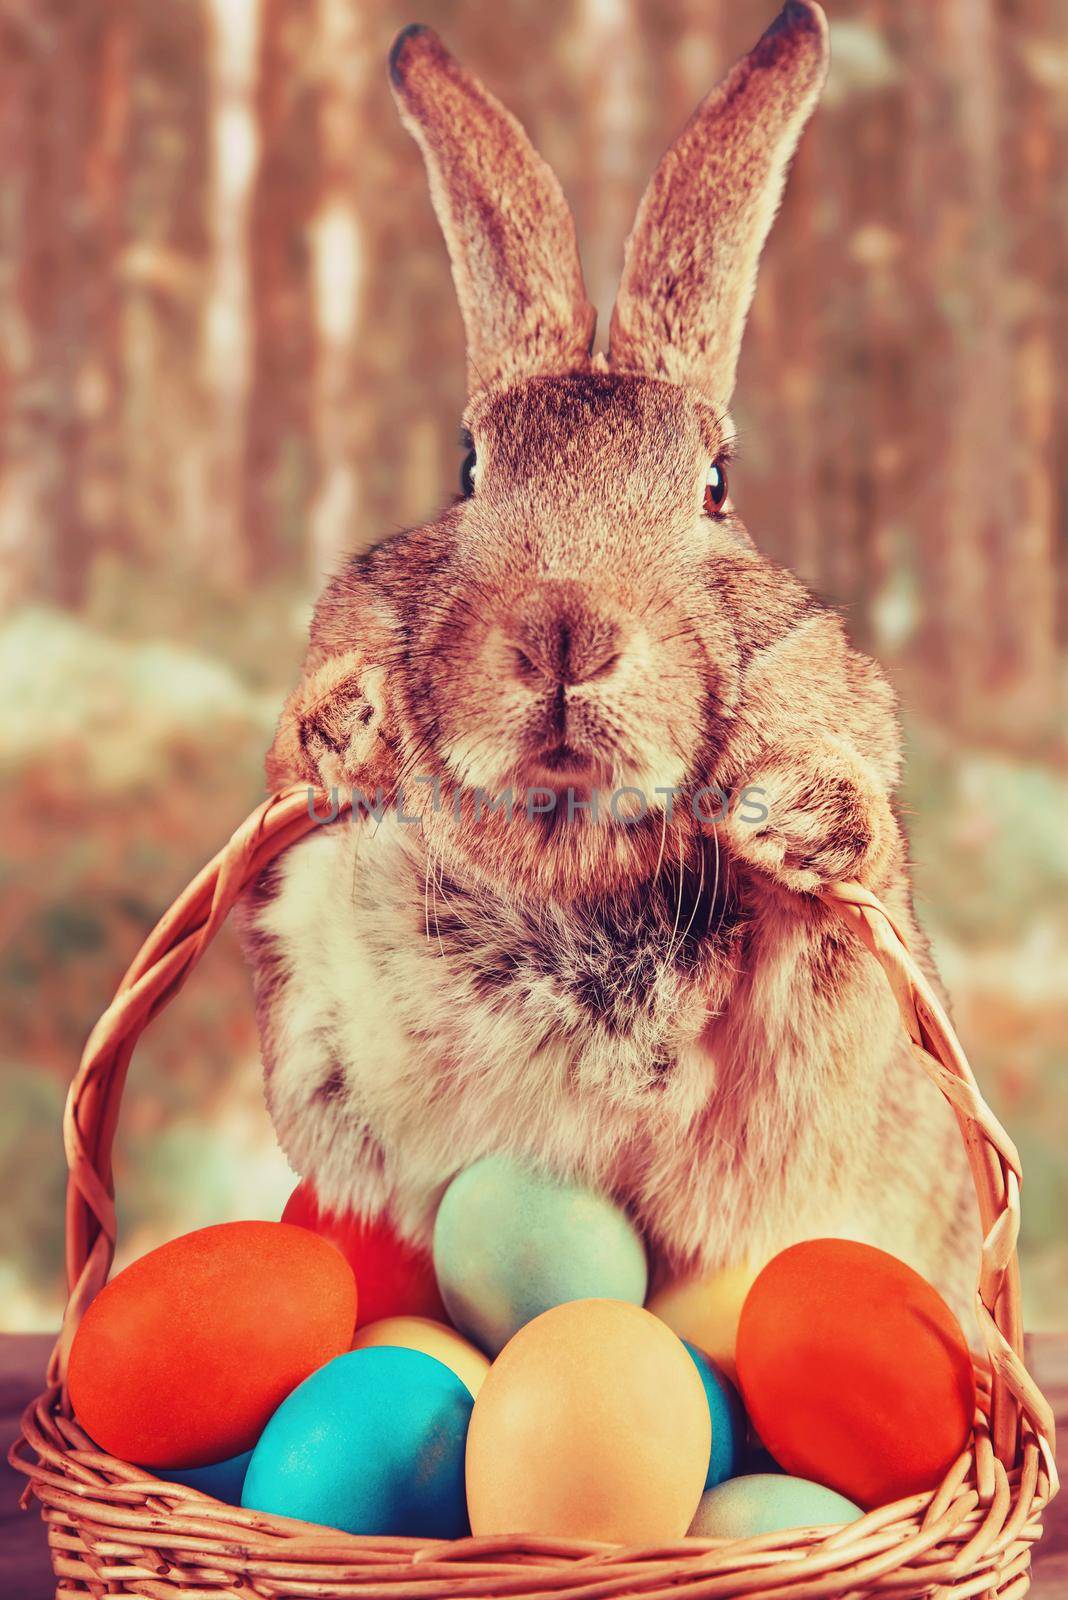 Brown Easter rabbit holds basket with colored eggs on a wooden table outdoor. Image with instagram filter